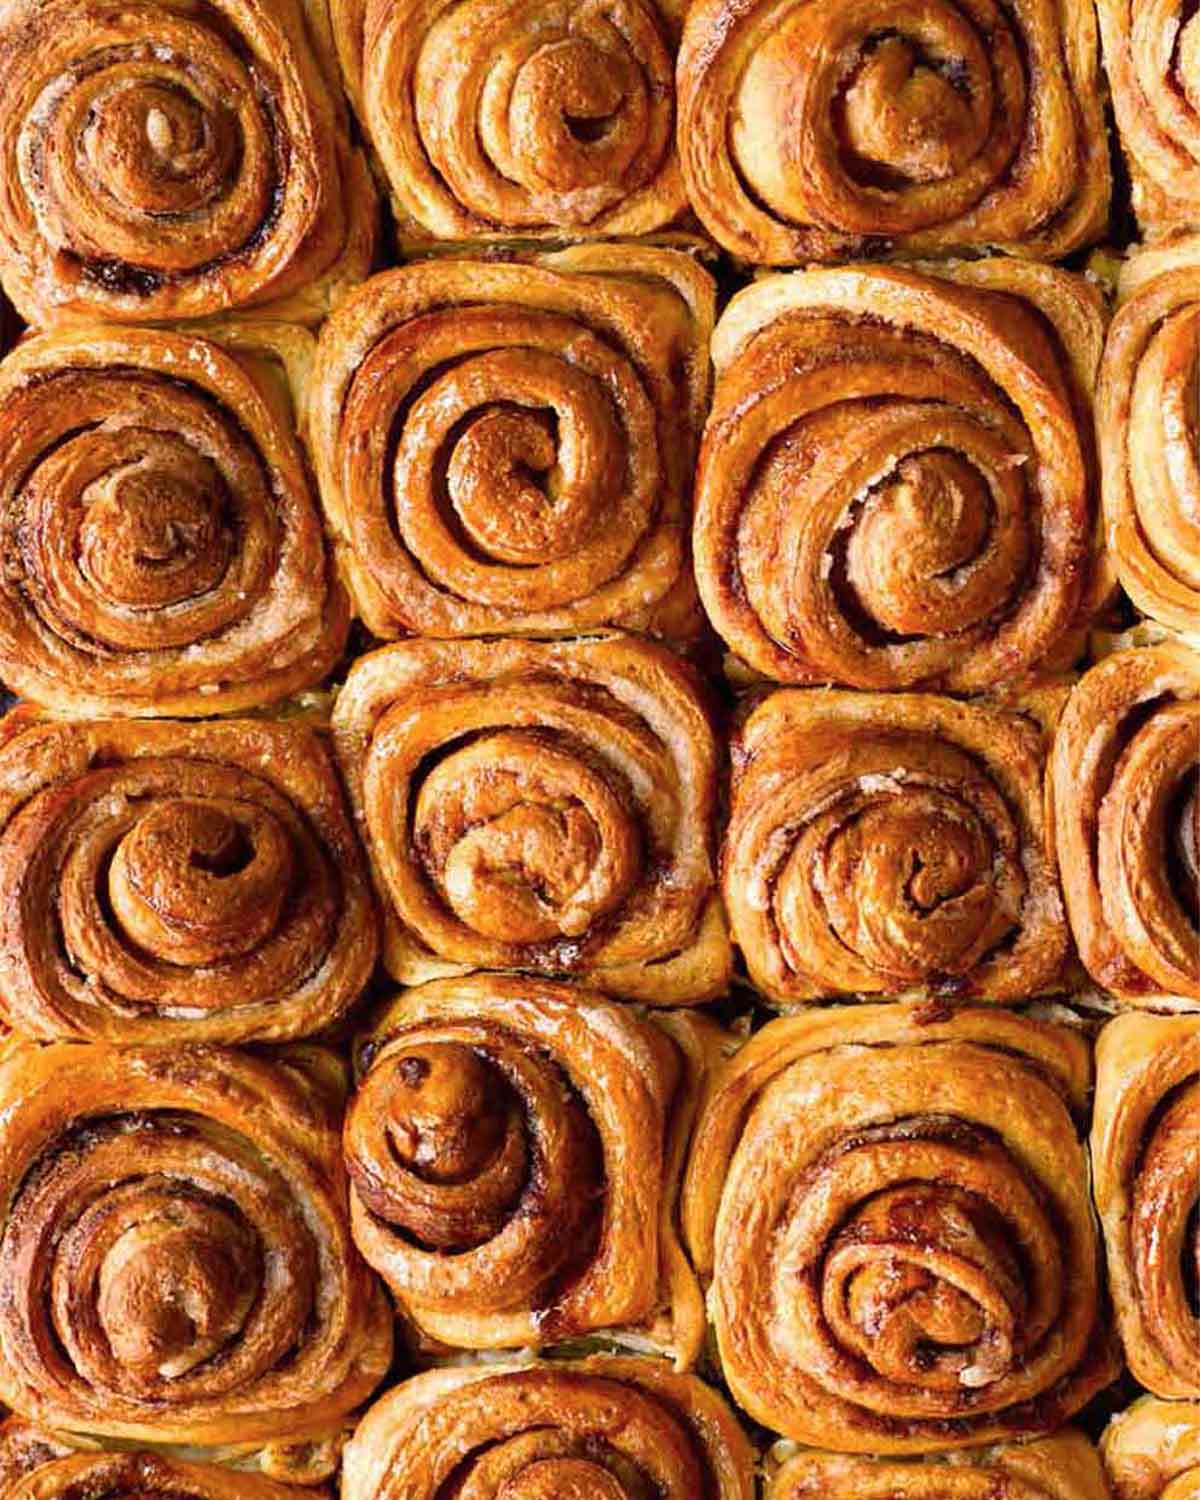 Lots of cinnamon rolls baked together